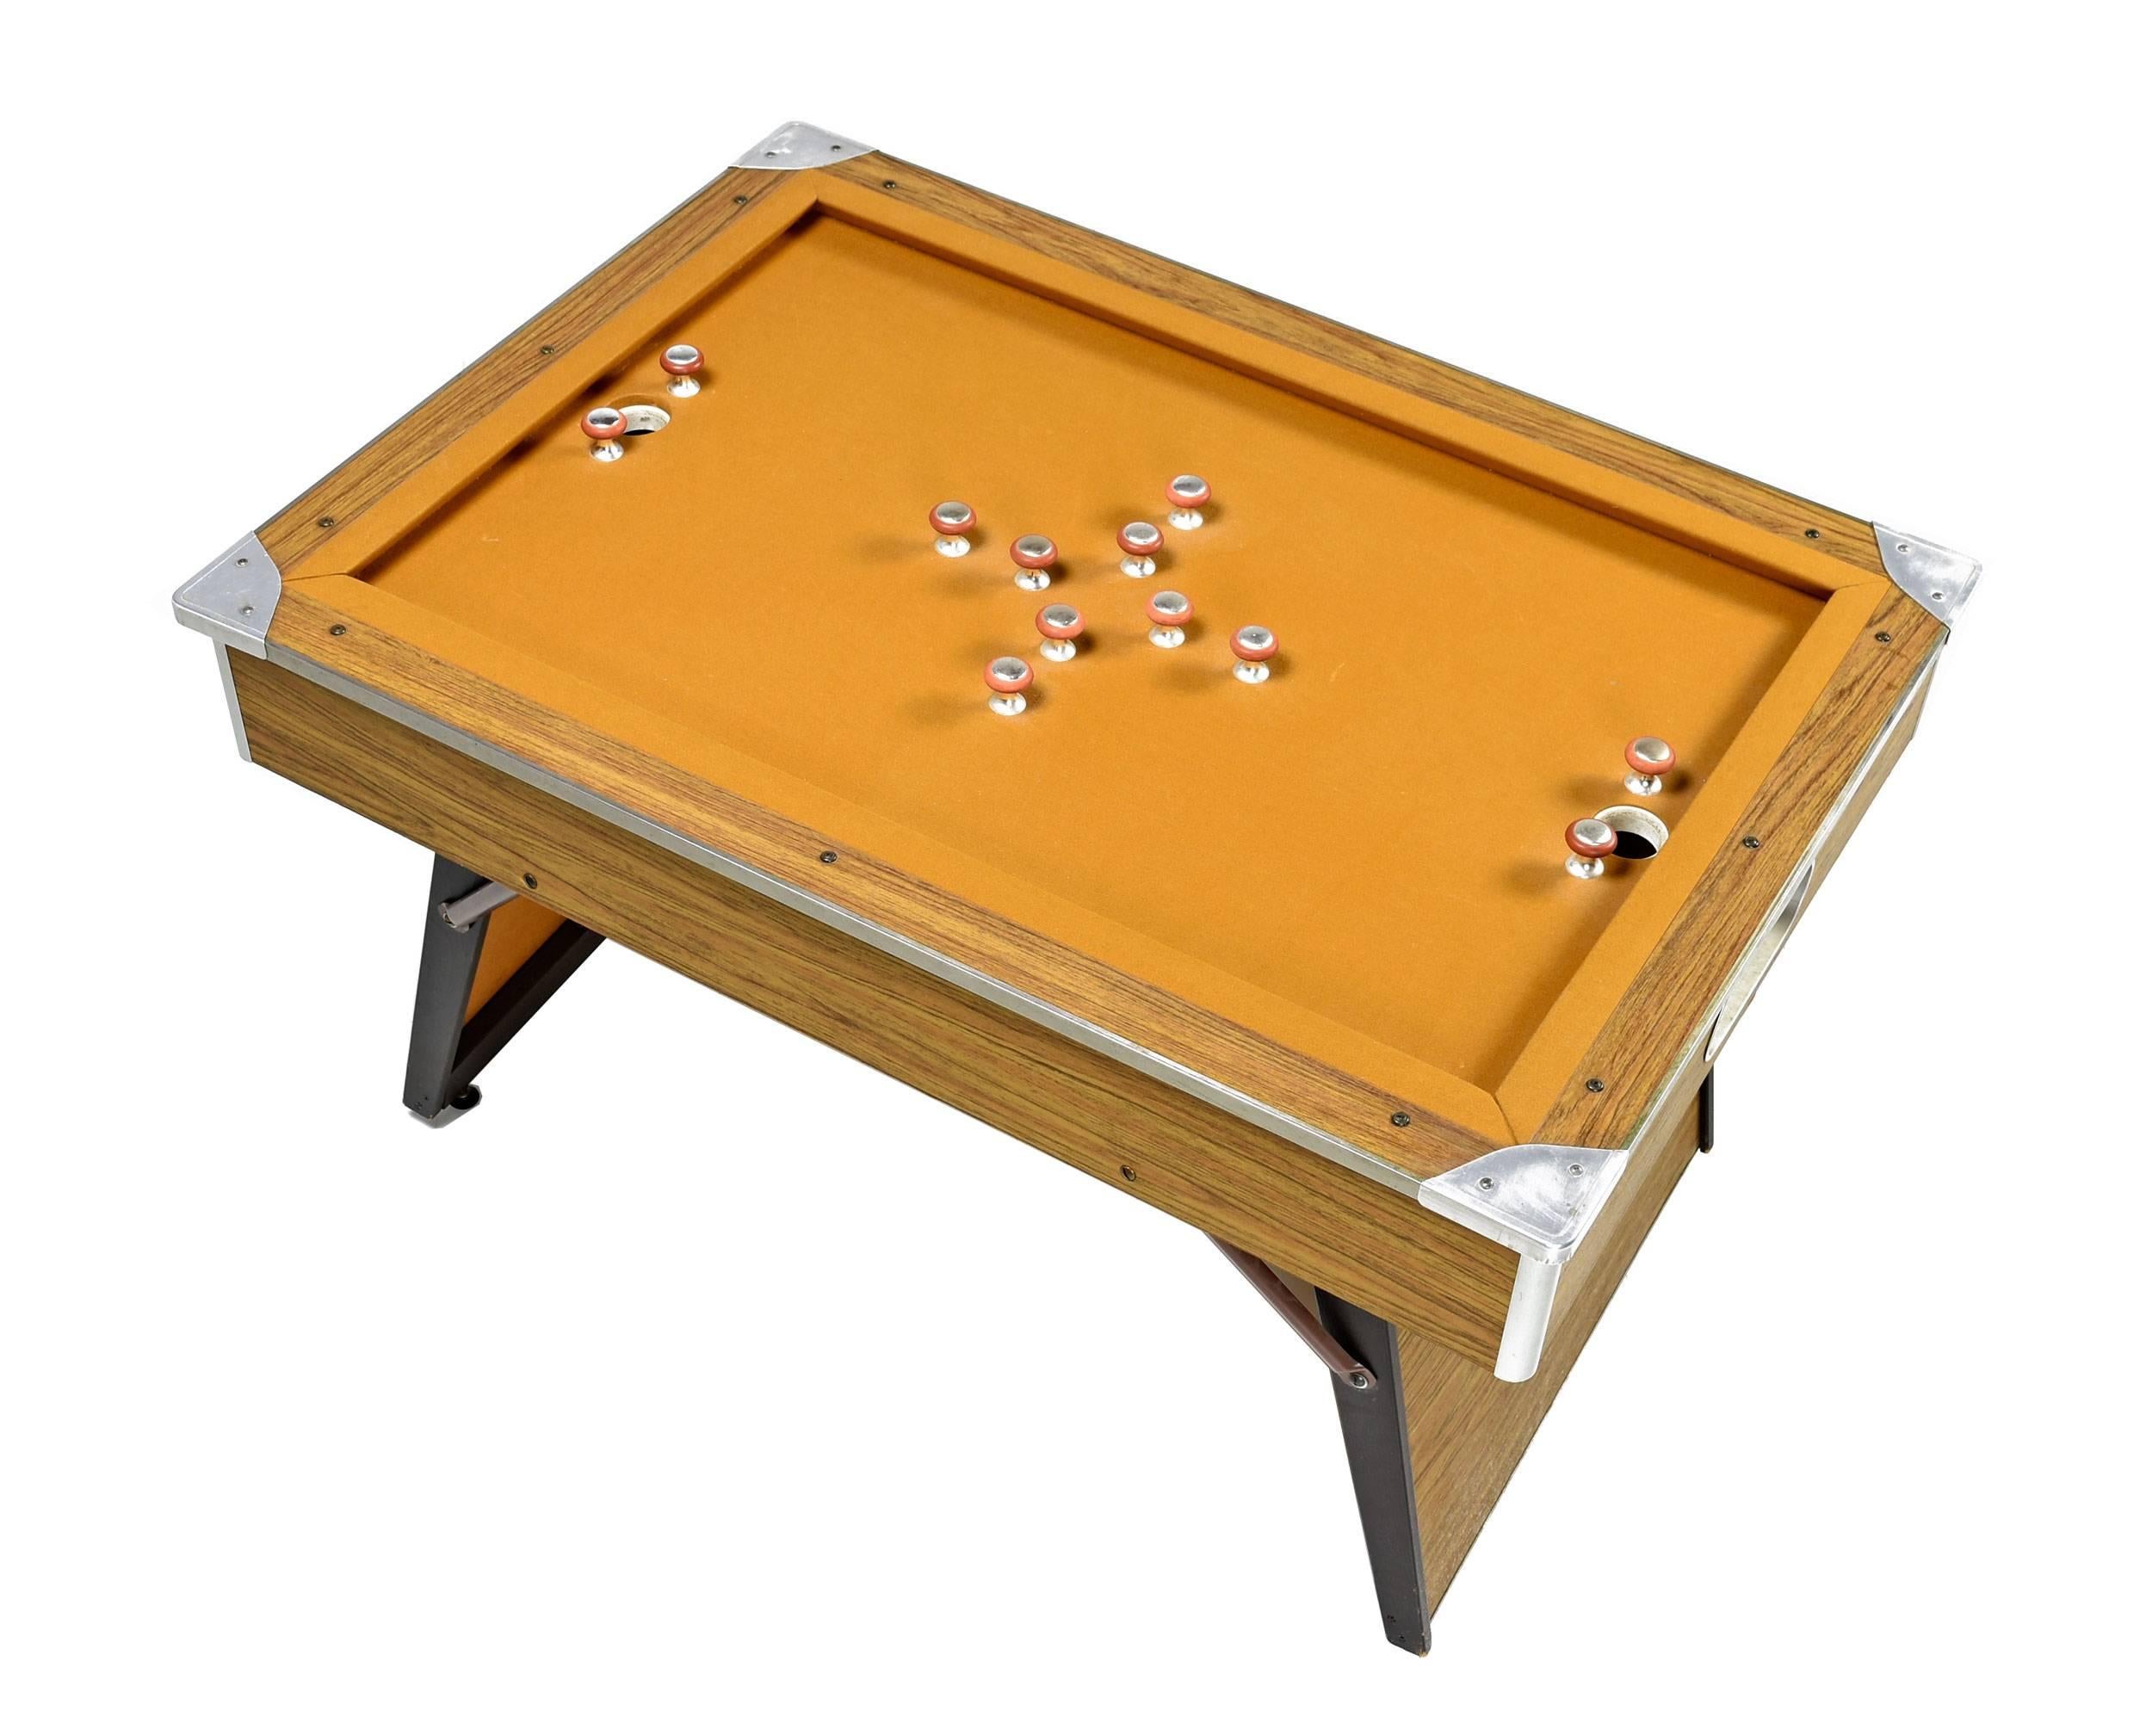 This super stylish modern 1970s vintage bumper pool table is a rare find. The table features the original yellow or orange felt, comes complete with cue sticks and balls, and is in excellent vintage condition. The legs fold underneath allowing for